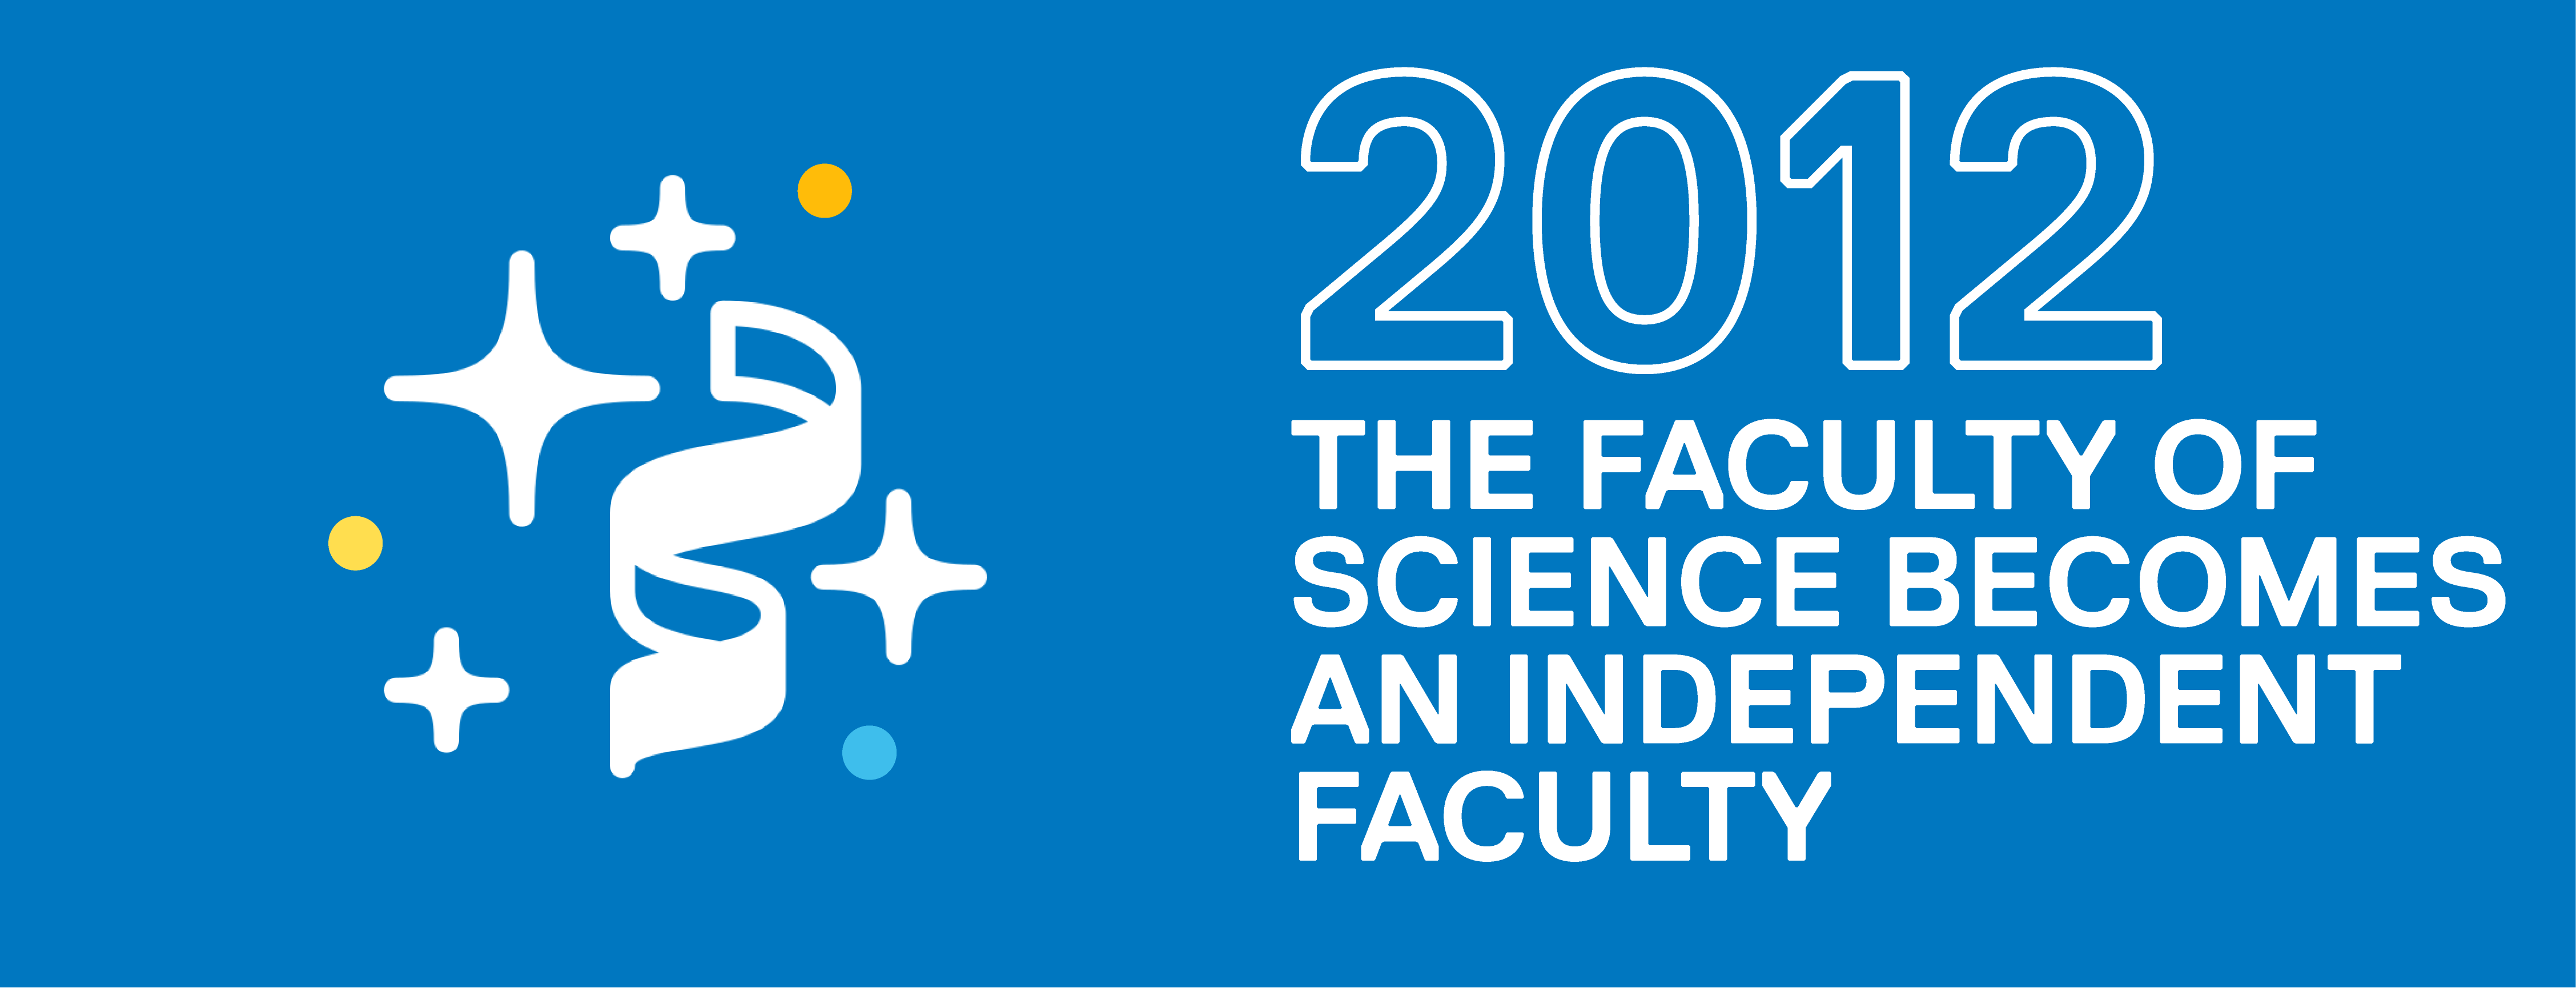 Two thousand twelve the faculty of science becomes an independent faculty